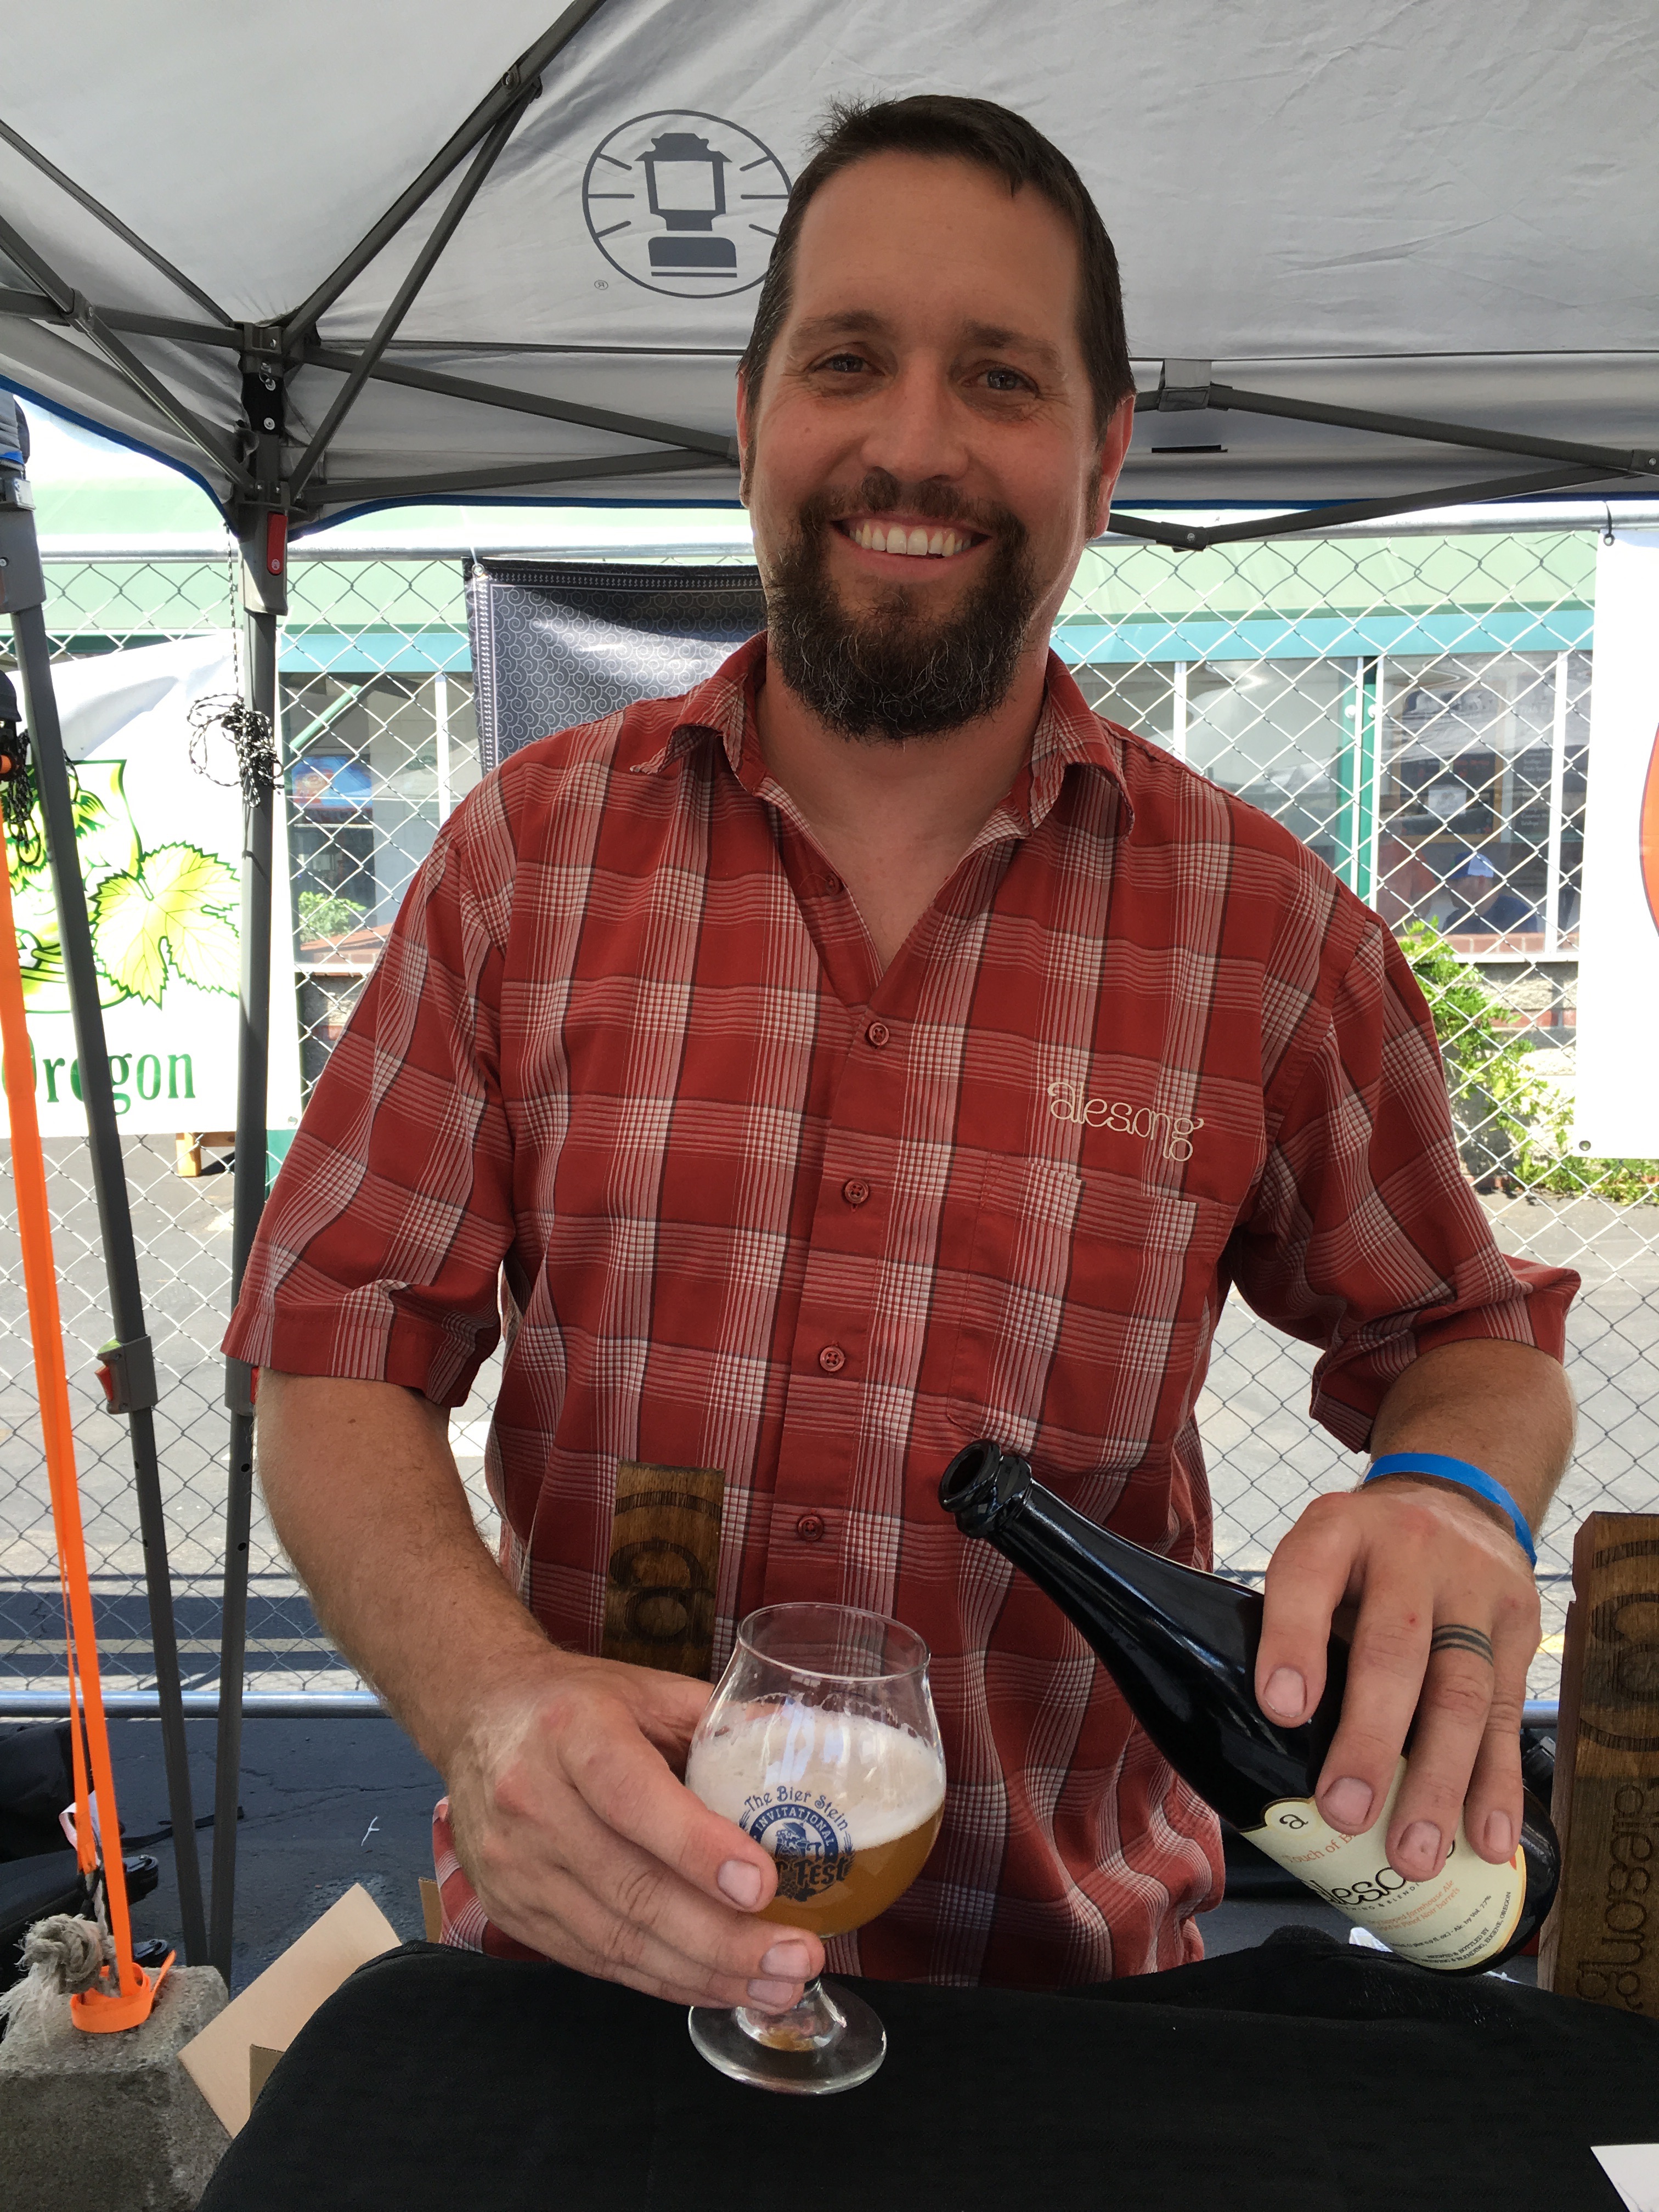 Matt Van Wyk of Alesong Brewing & Blending pouring Touch of Brett at The Bier Stein Invitational